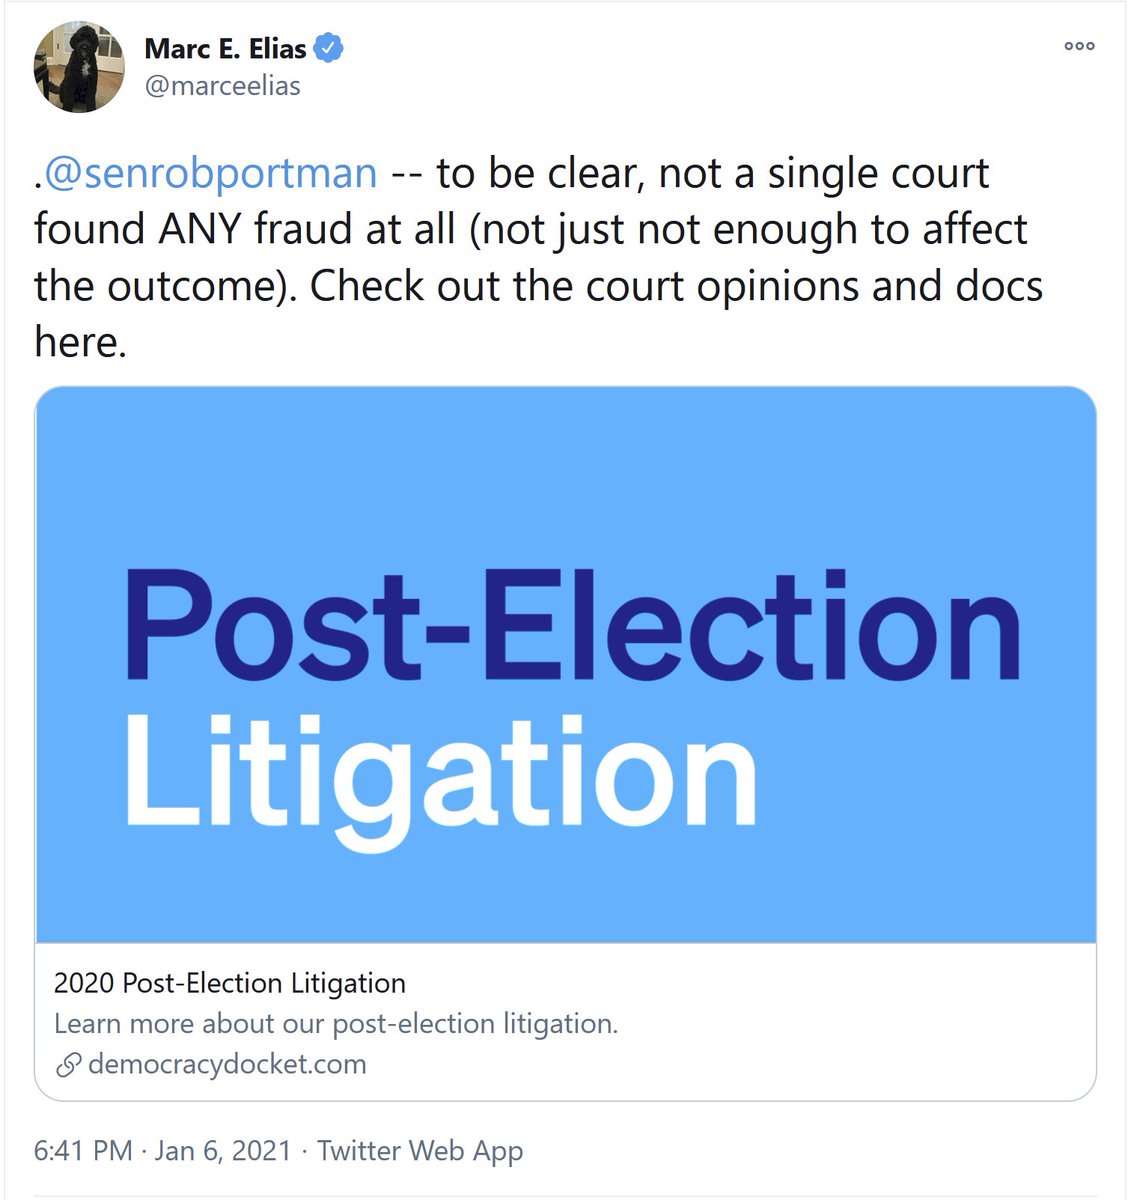 17/ Why do I say Republicans made baseless claims of election fraud? Because  @DemocracyDocket documented Trump & allies lost 62 of 63 courts cases, &  @marceelias says there was not a single case where the court found enough evidence to merit fraud claims. https://twitter.com/kentbye/status/1347449746529472514